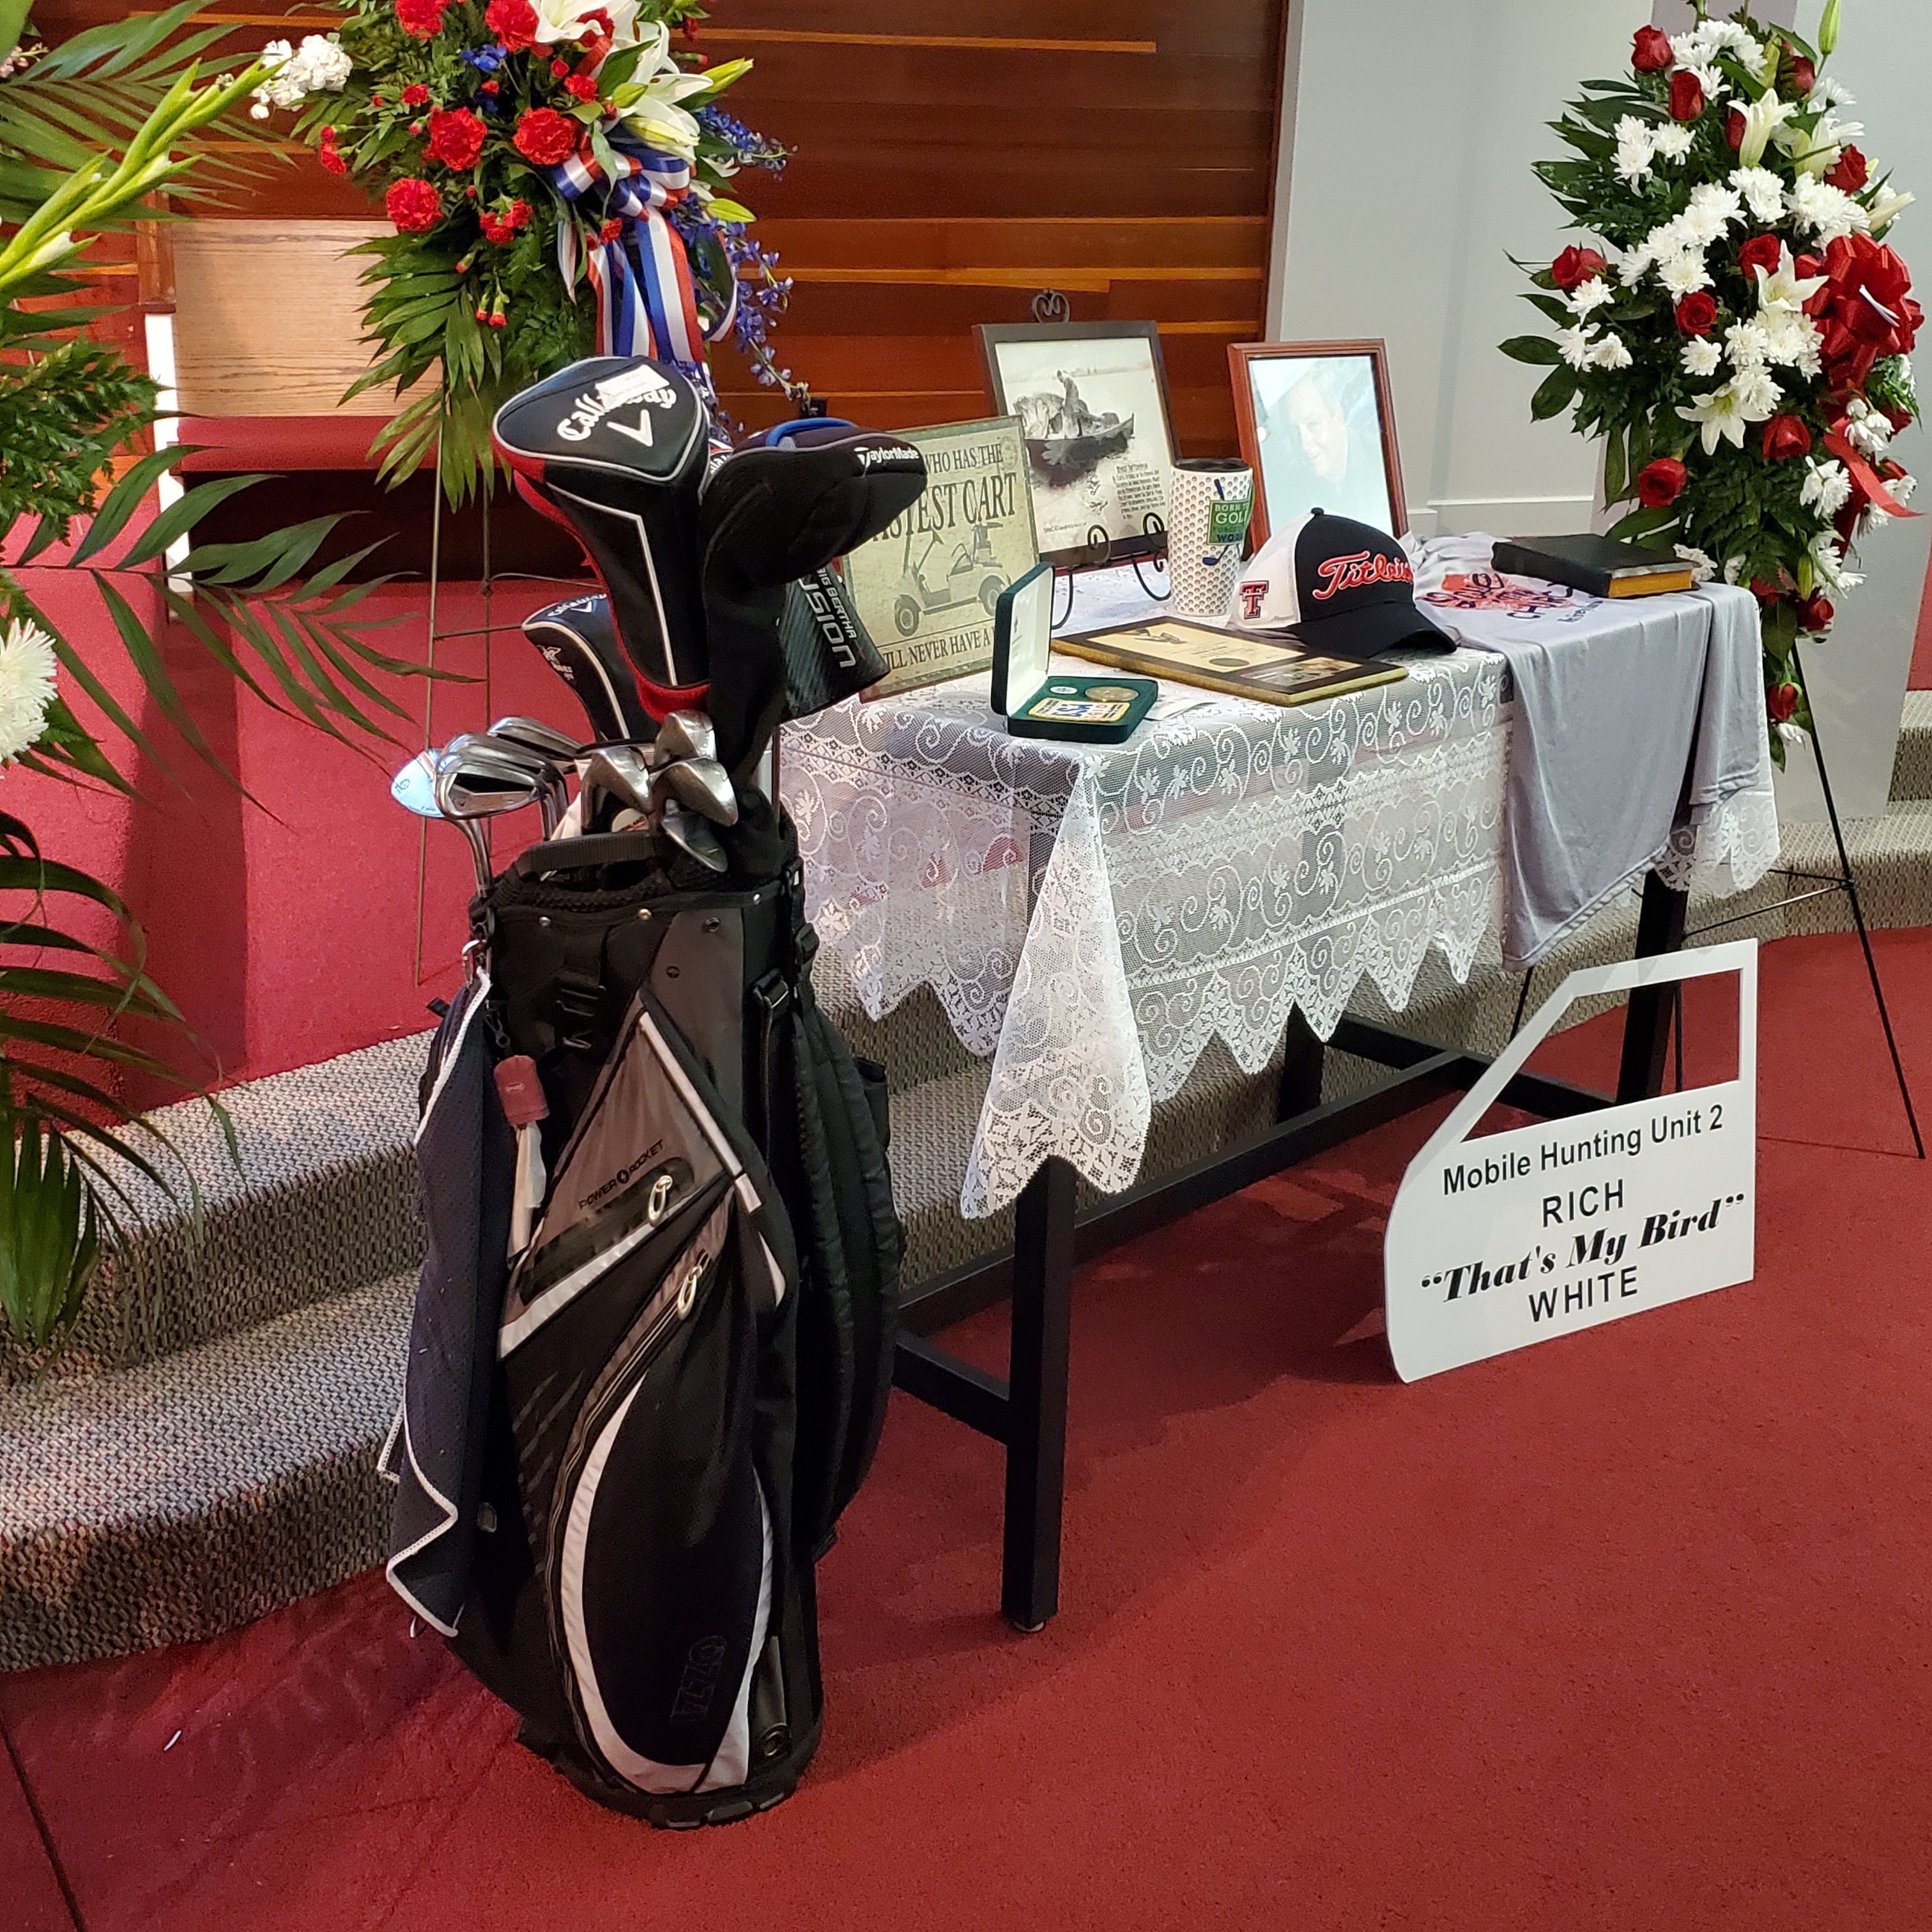 A Memorial Table at the Service for Richard White